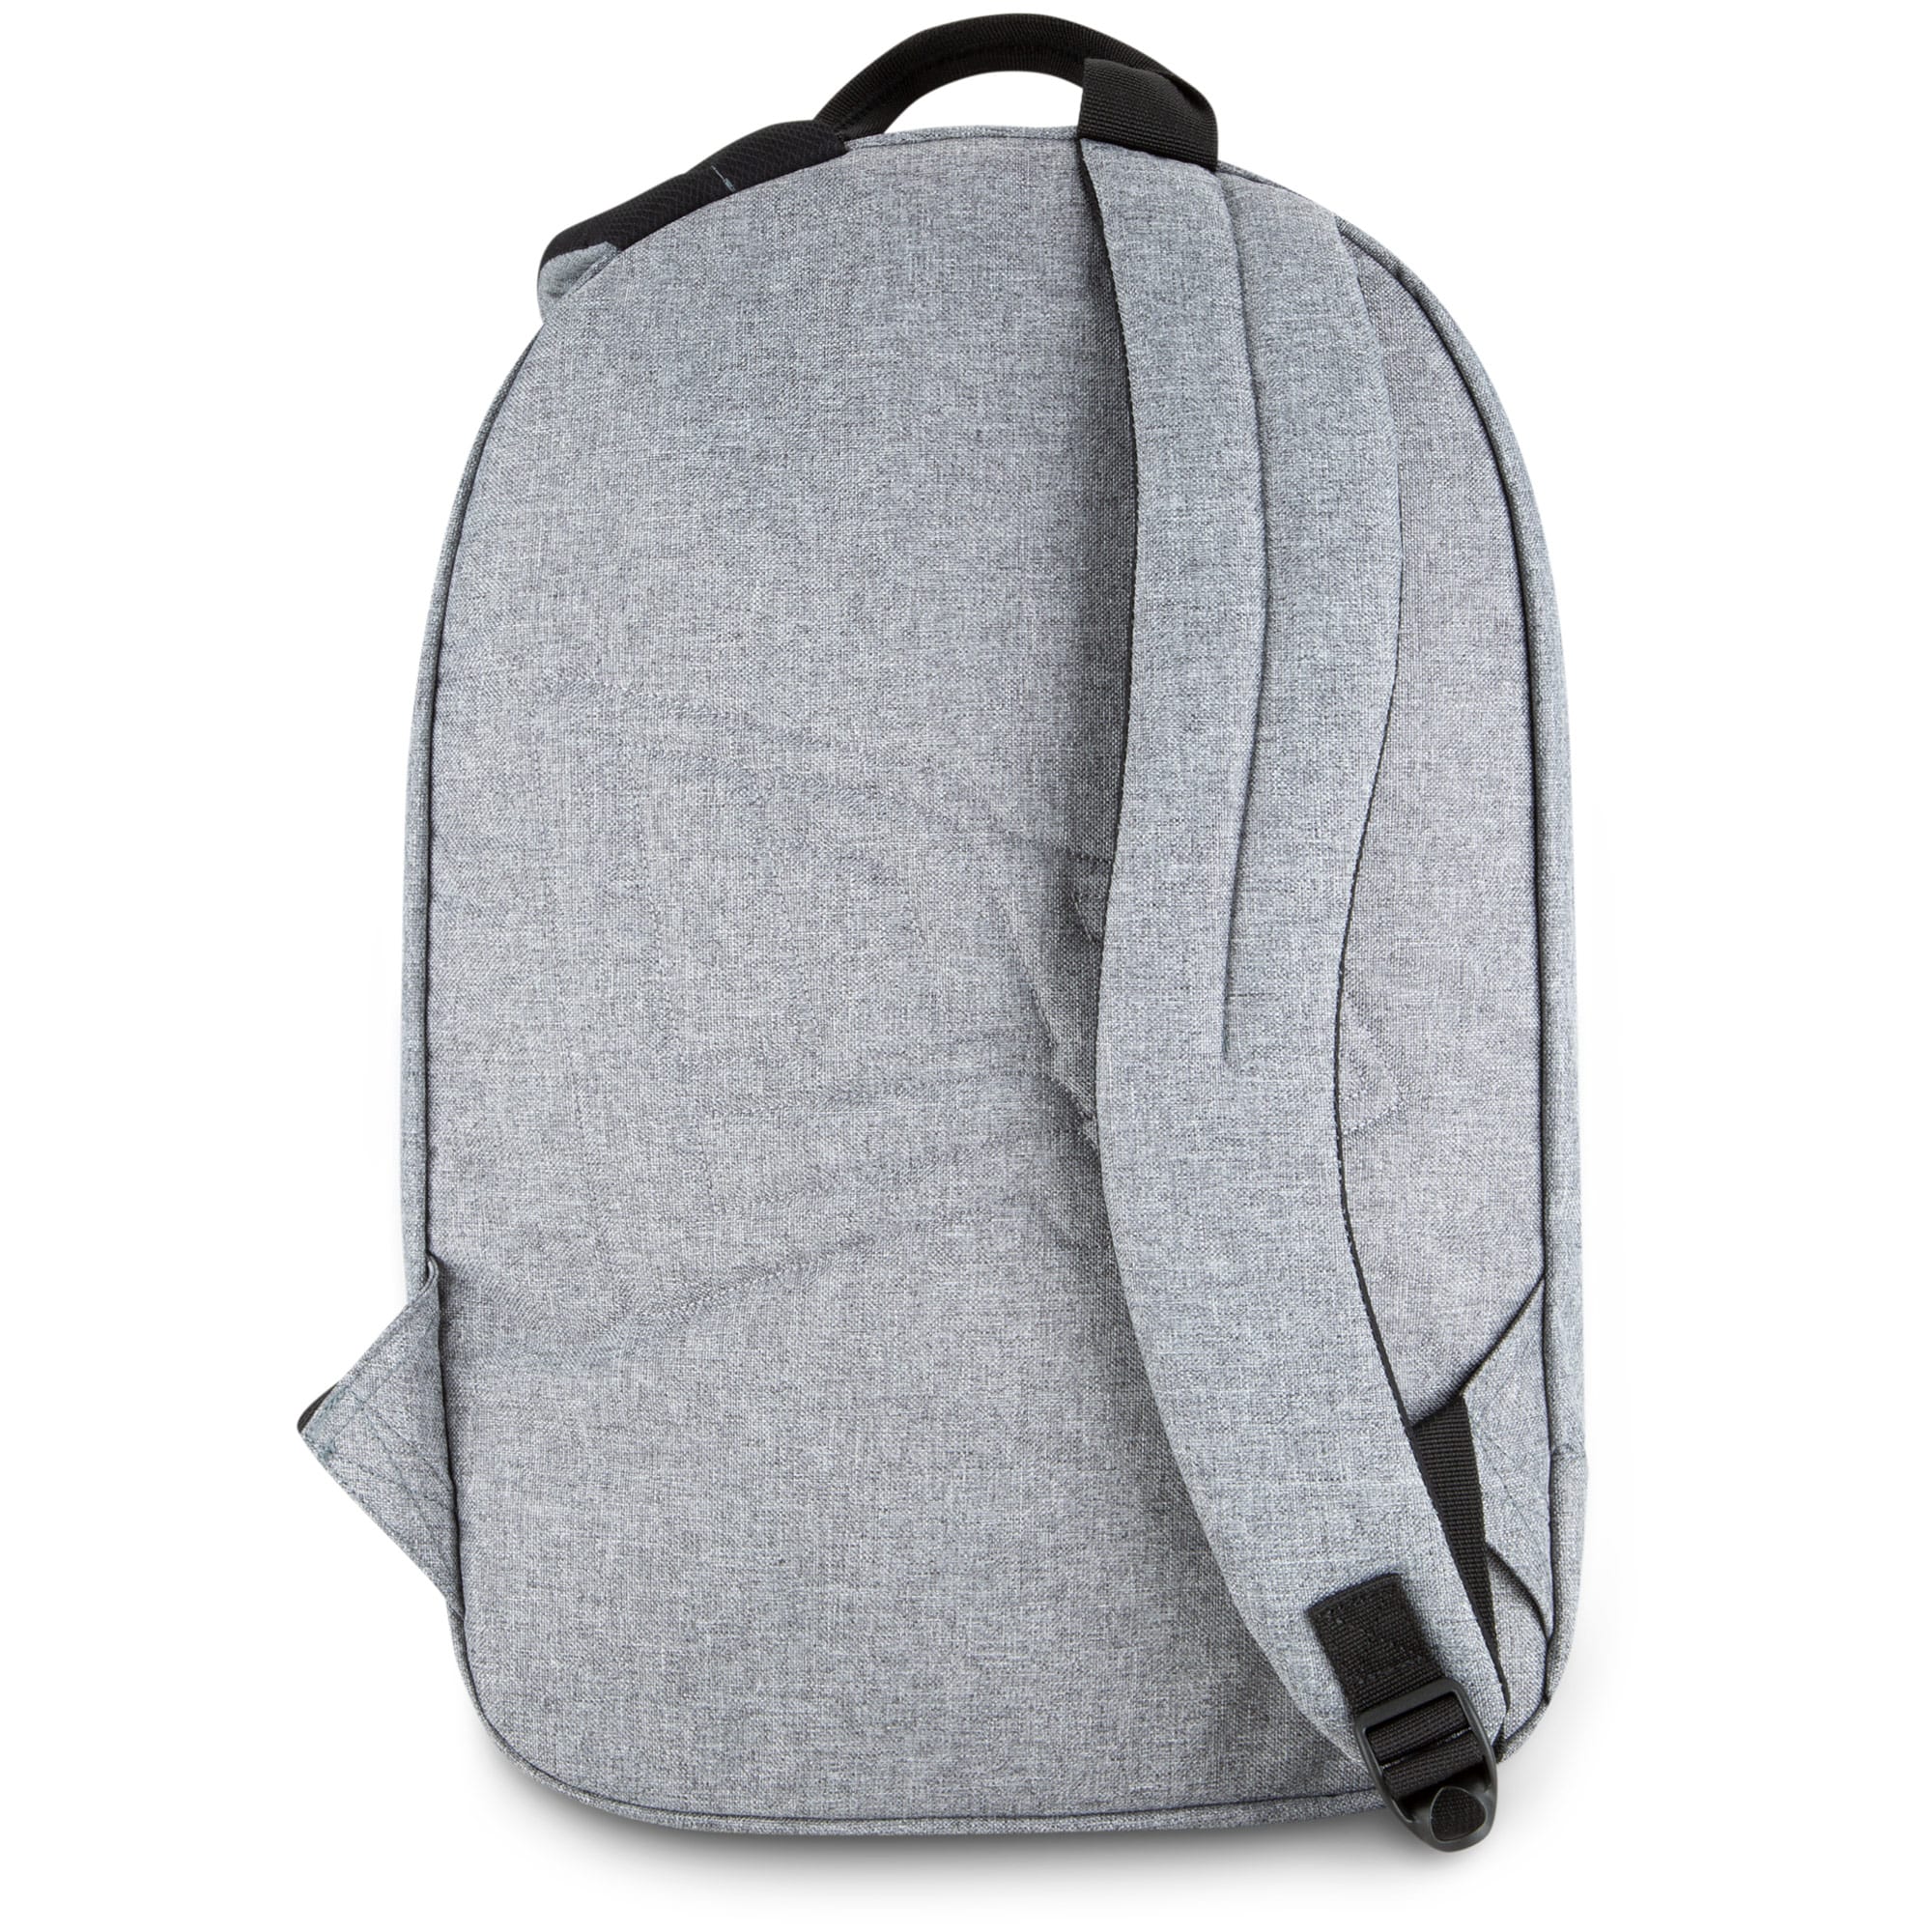 New Era Los Angeles Dodgers Cram City Connect Backpack - image 5 of 5